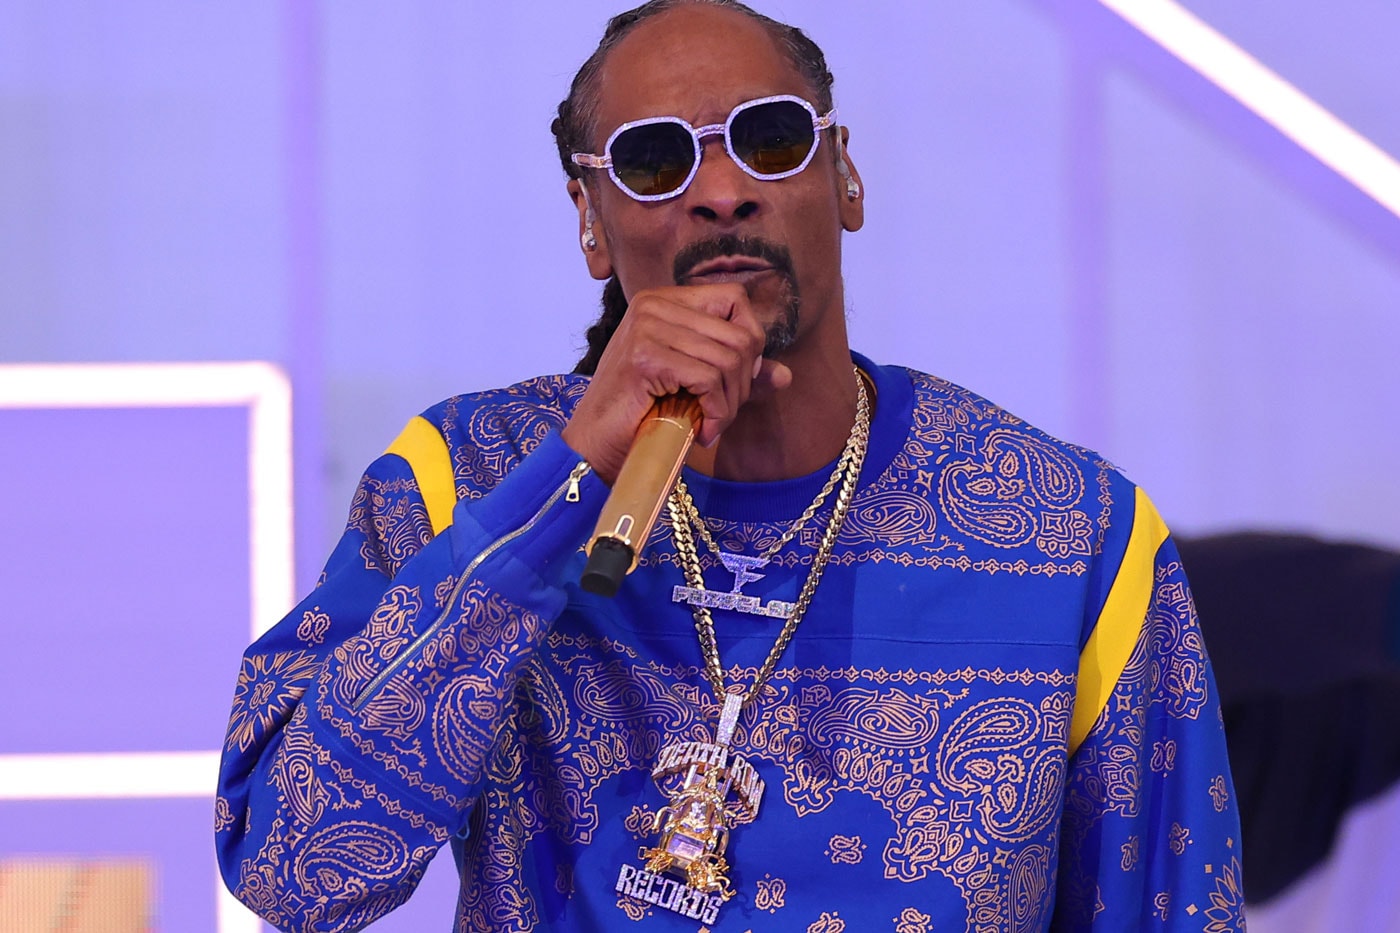 Take a Closer Look at Snoop Dogg's New Iced Out Death Row Records Chain He Wore to Super Bowl LVI los angeles rams cincinatti bengals joe burrows odell beckham jr objr mattew stafford